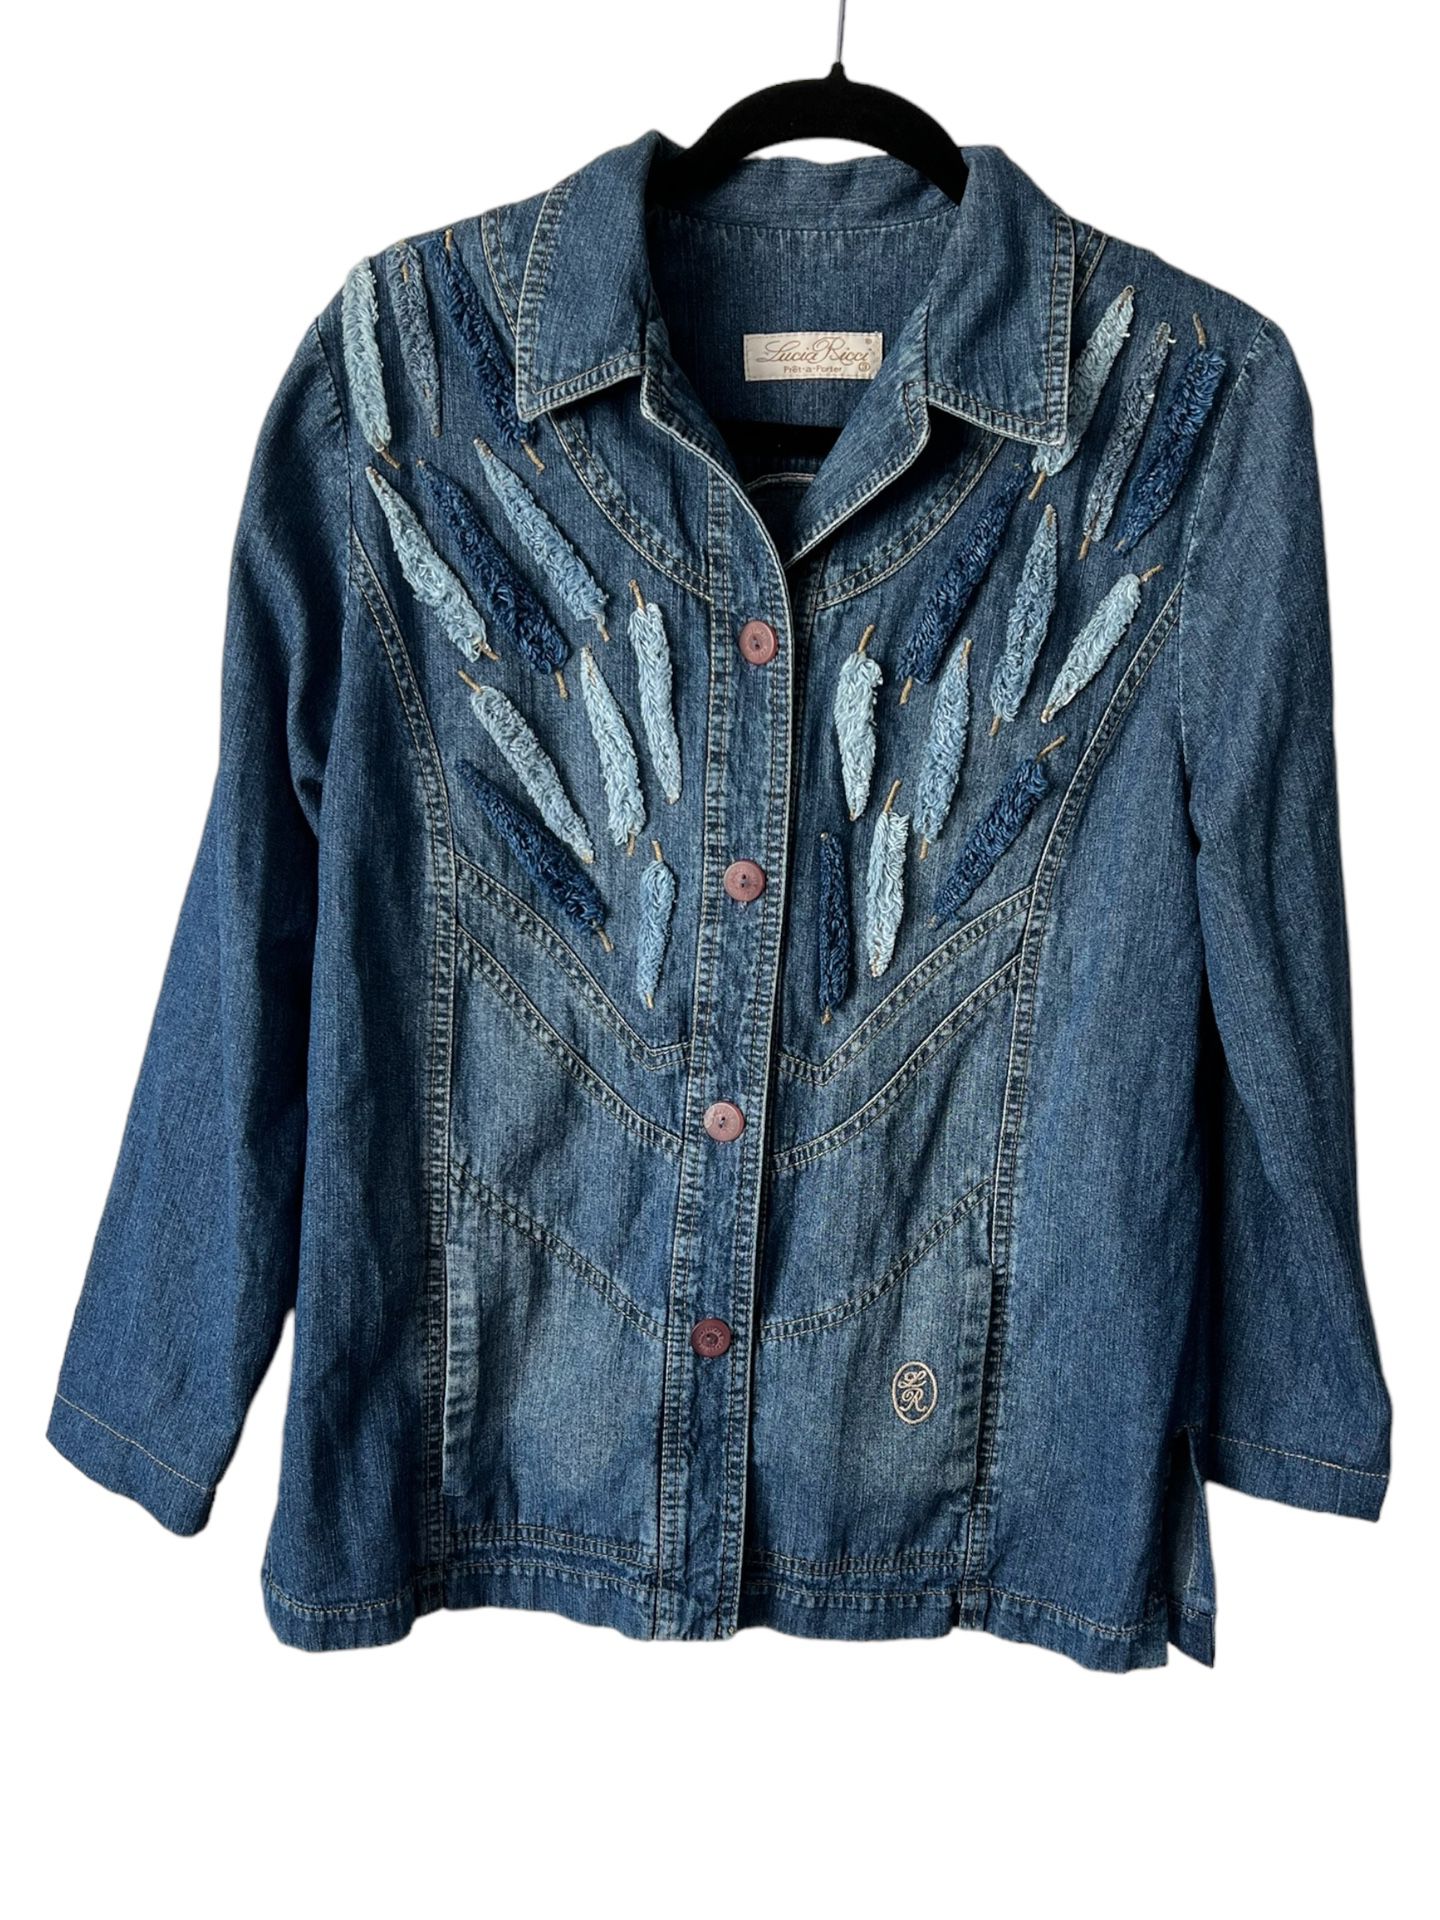 Jean Jacket Lucia Ricci Fitted Sz 3 texture With Some Fur Pre-Porter.  This beautiful blue jean jacket by Lucia Ricci is a must-have for any fashion-f